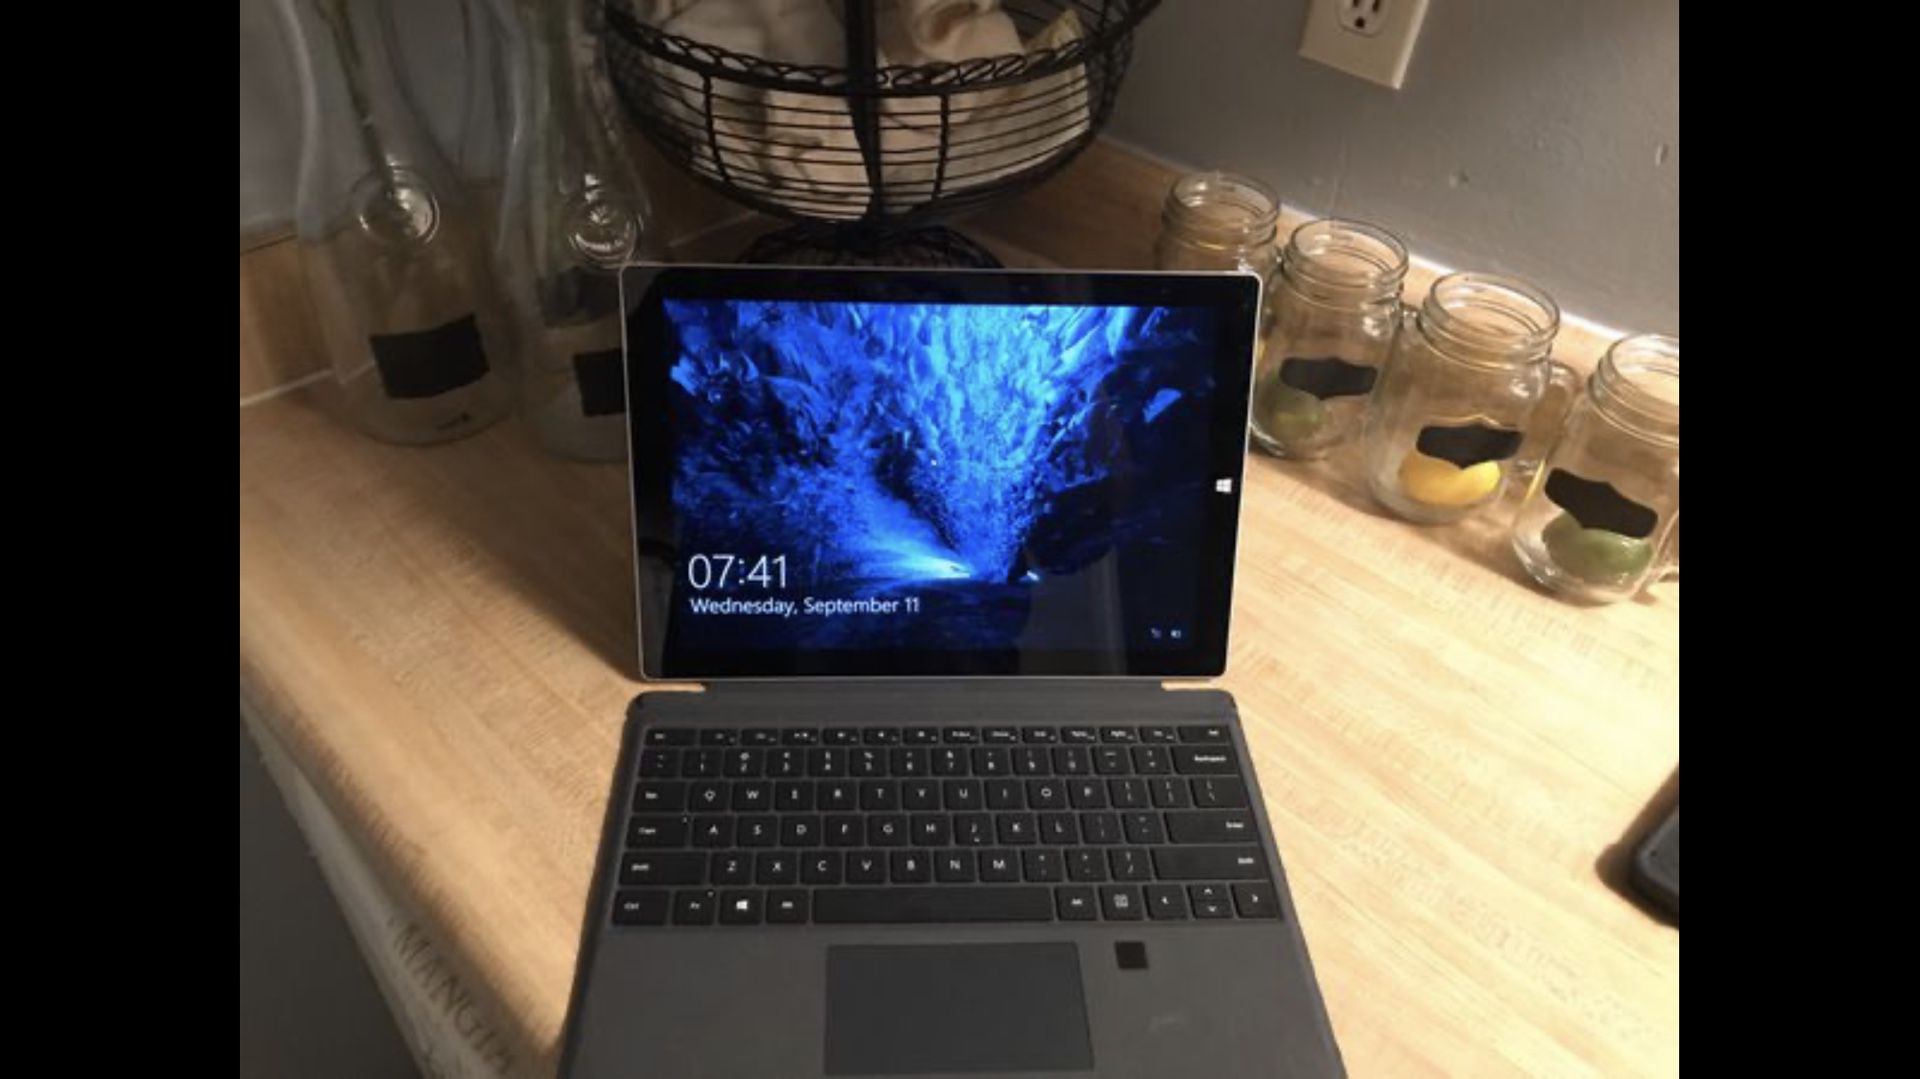 Microsoft Surface Pro 3 i5 64gb 4gb ram (must sell today)